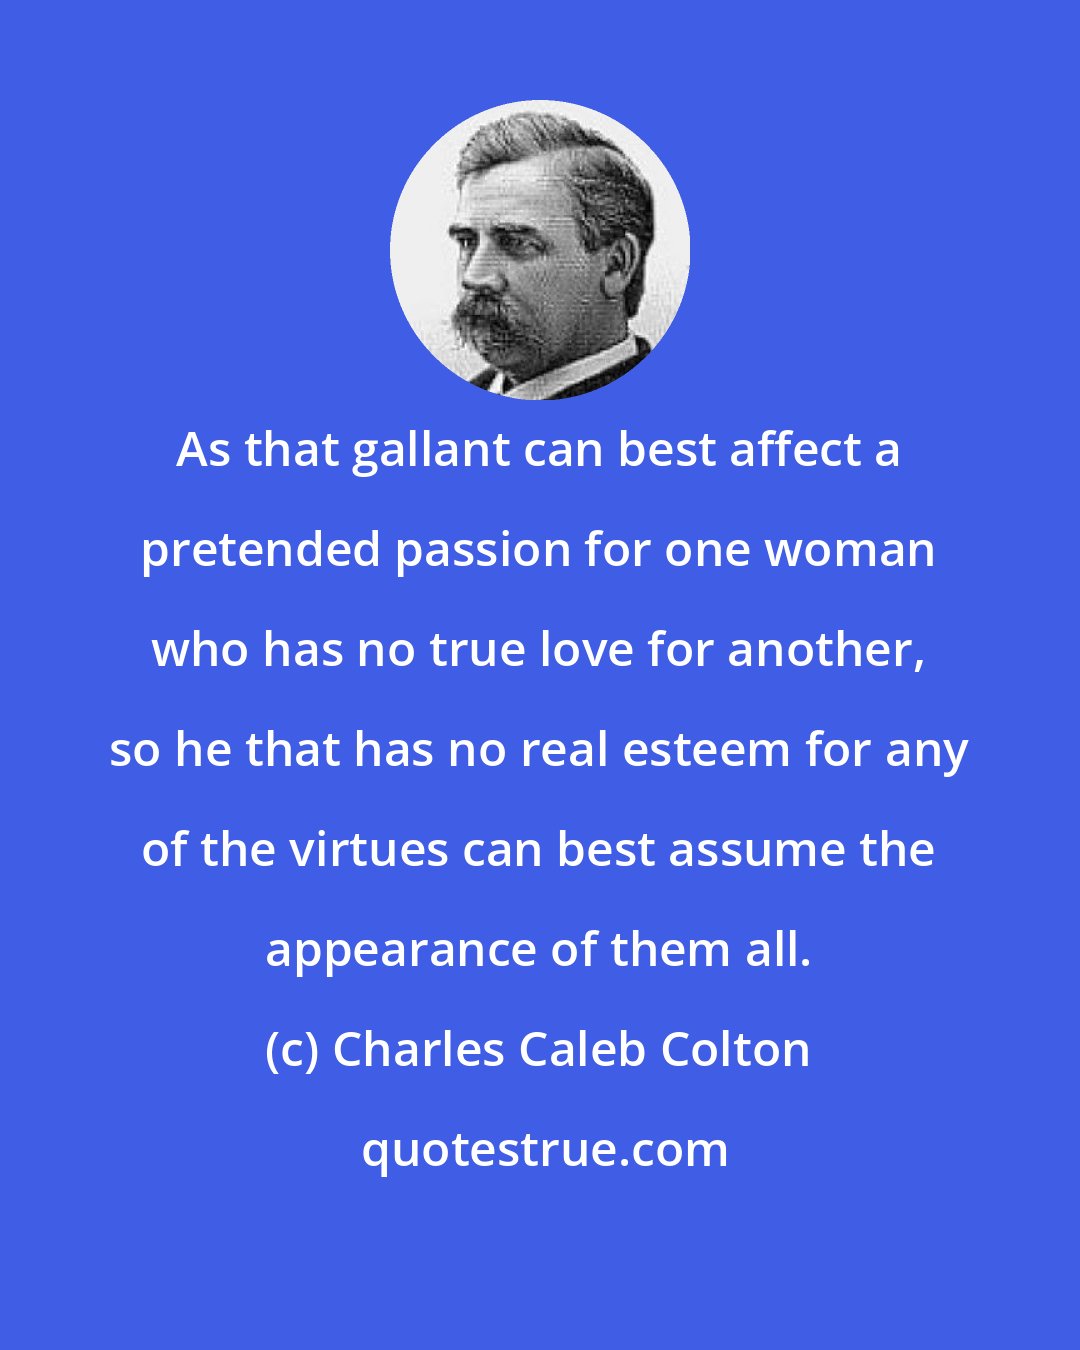 Charles Caleb Colton: As that gallant can best affect a pretended passion for one woman who has no true love for another, so he that has no real esteem for any of the virtues can best assume the appearance of them all.